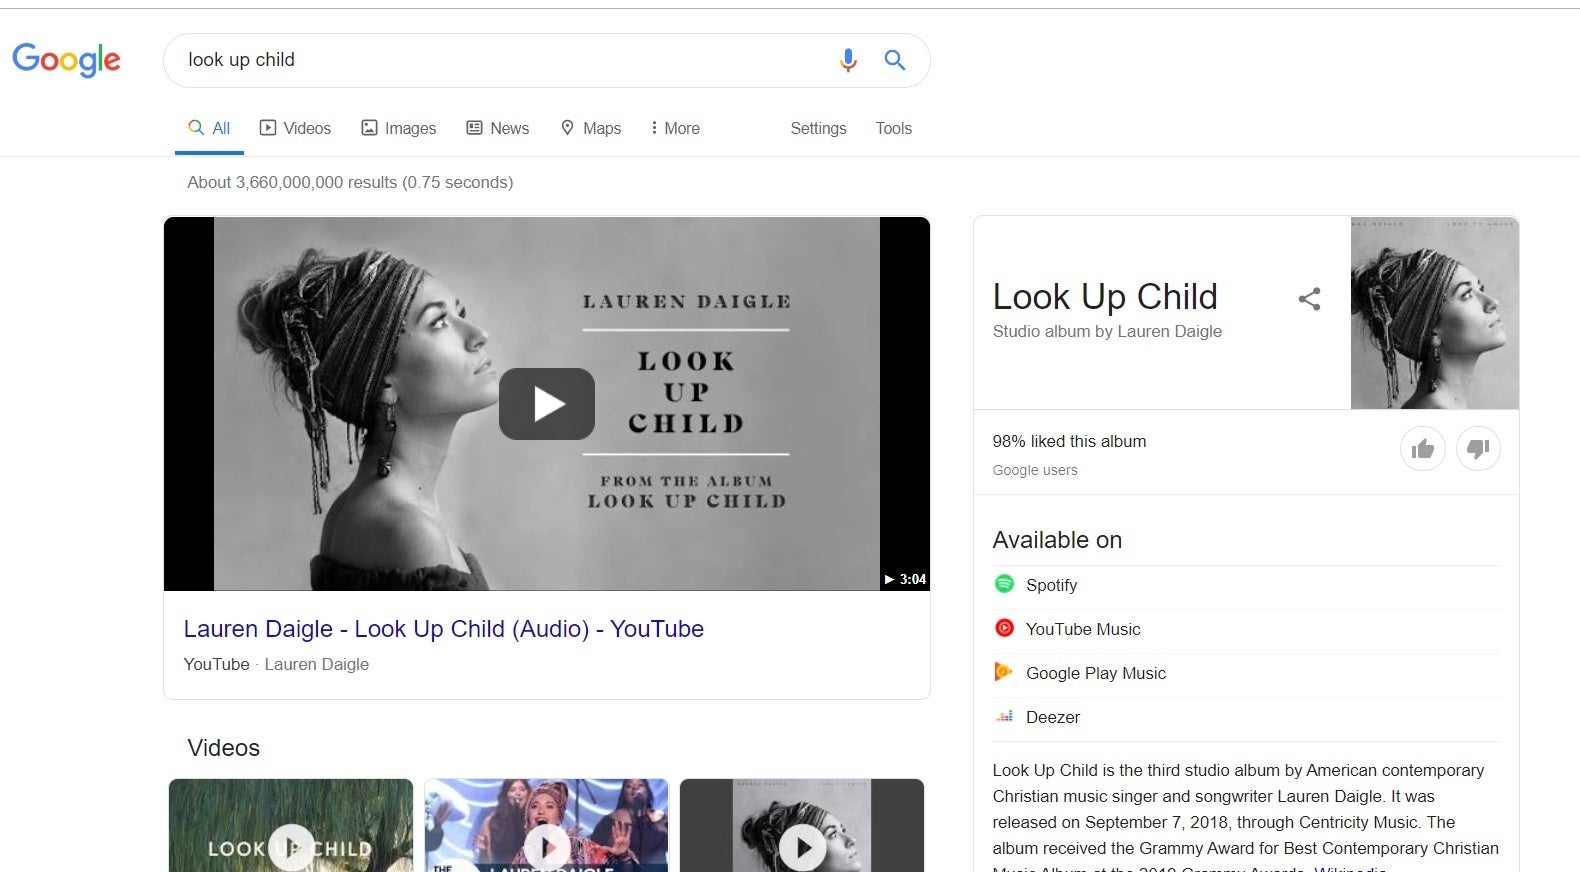 Desktop view - YouTube Music now gets featured alongside Spotify and Google Play Music in search results